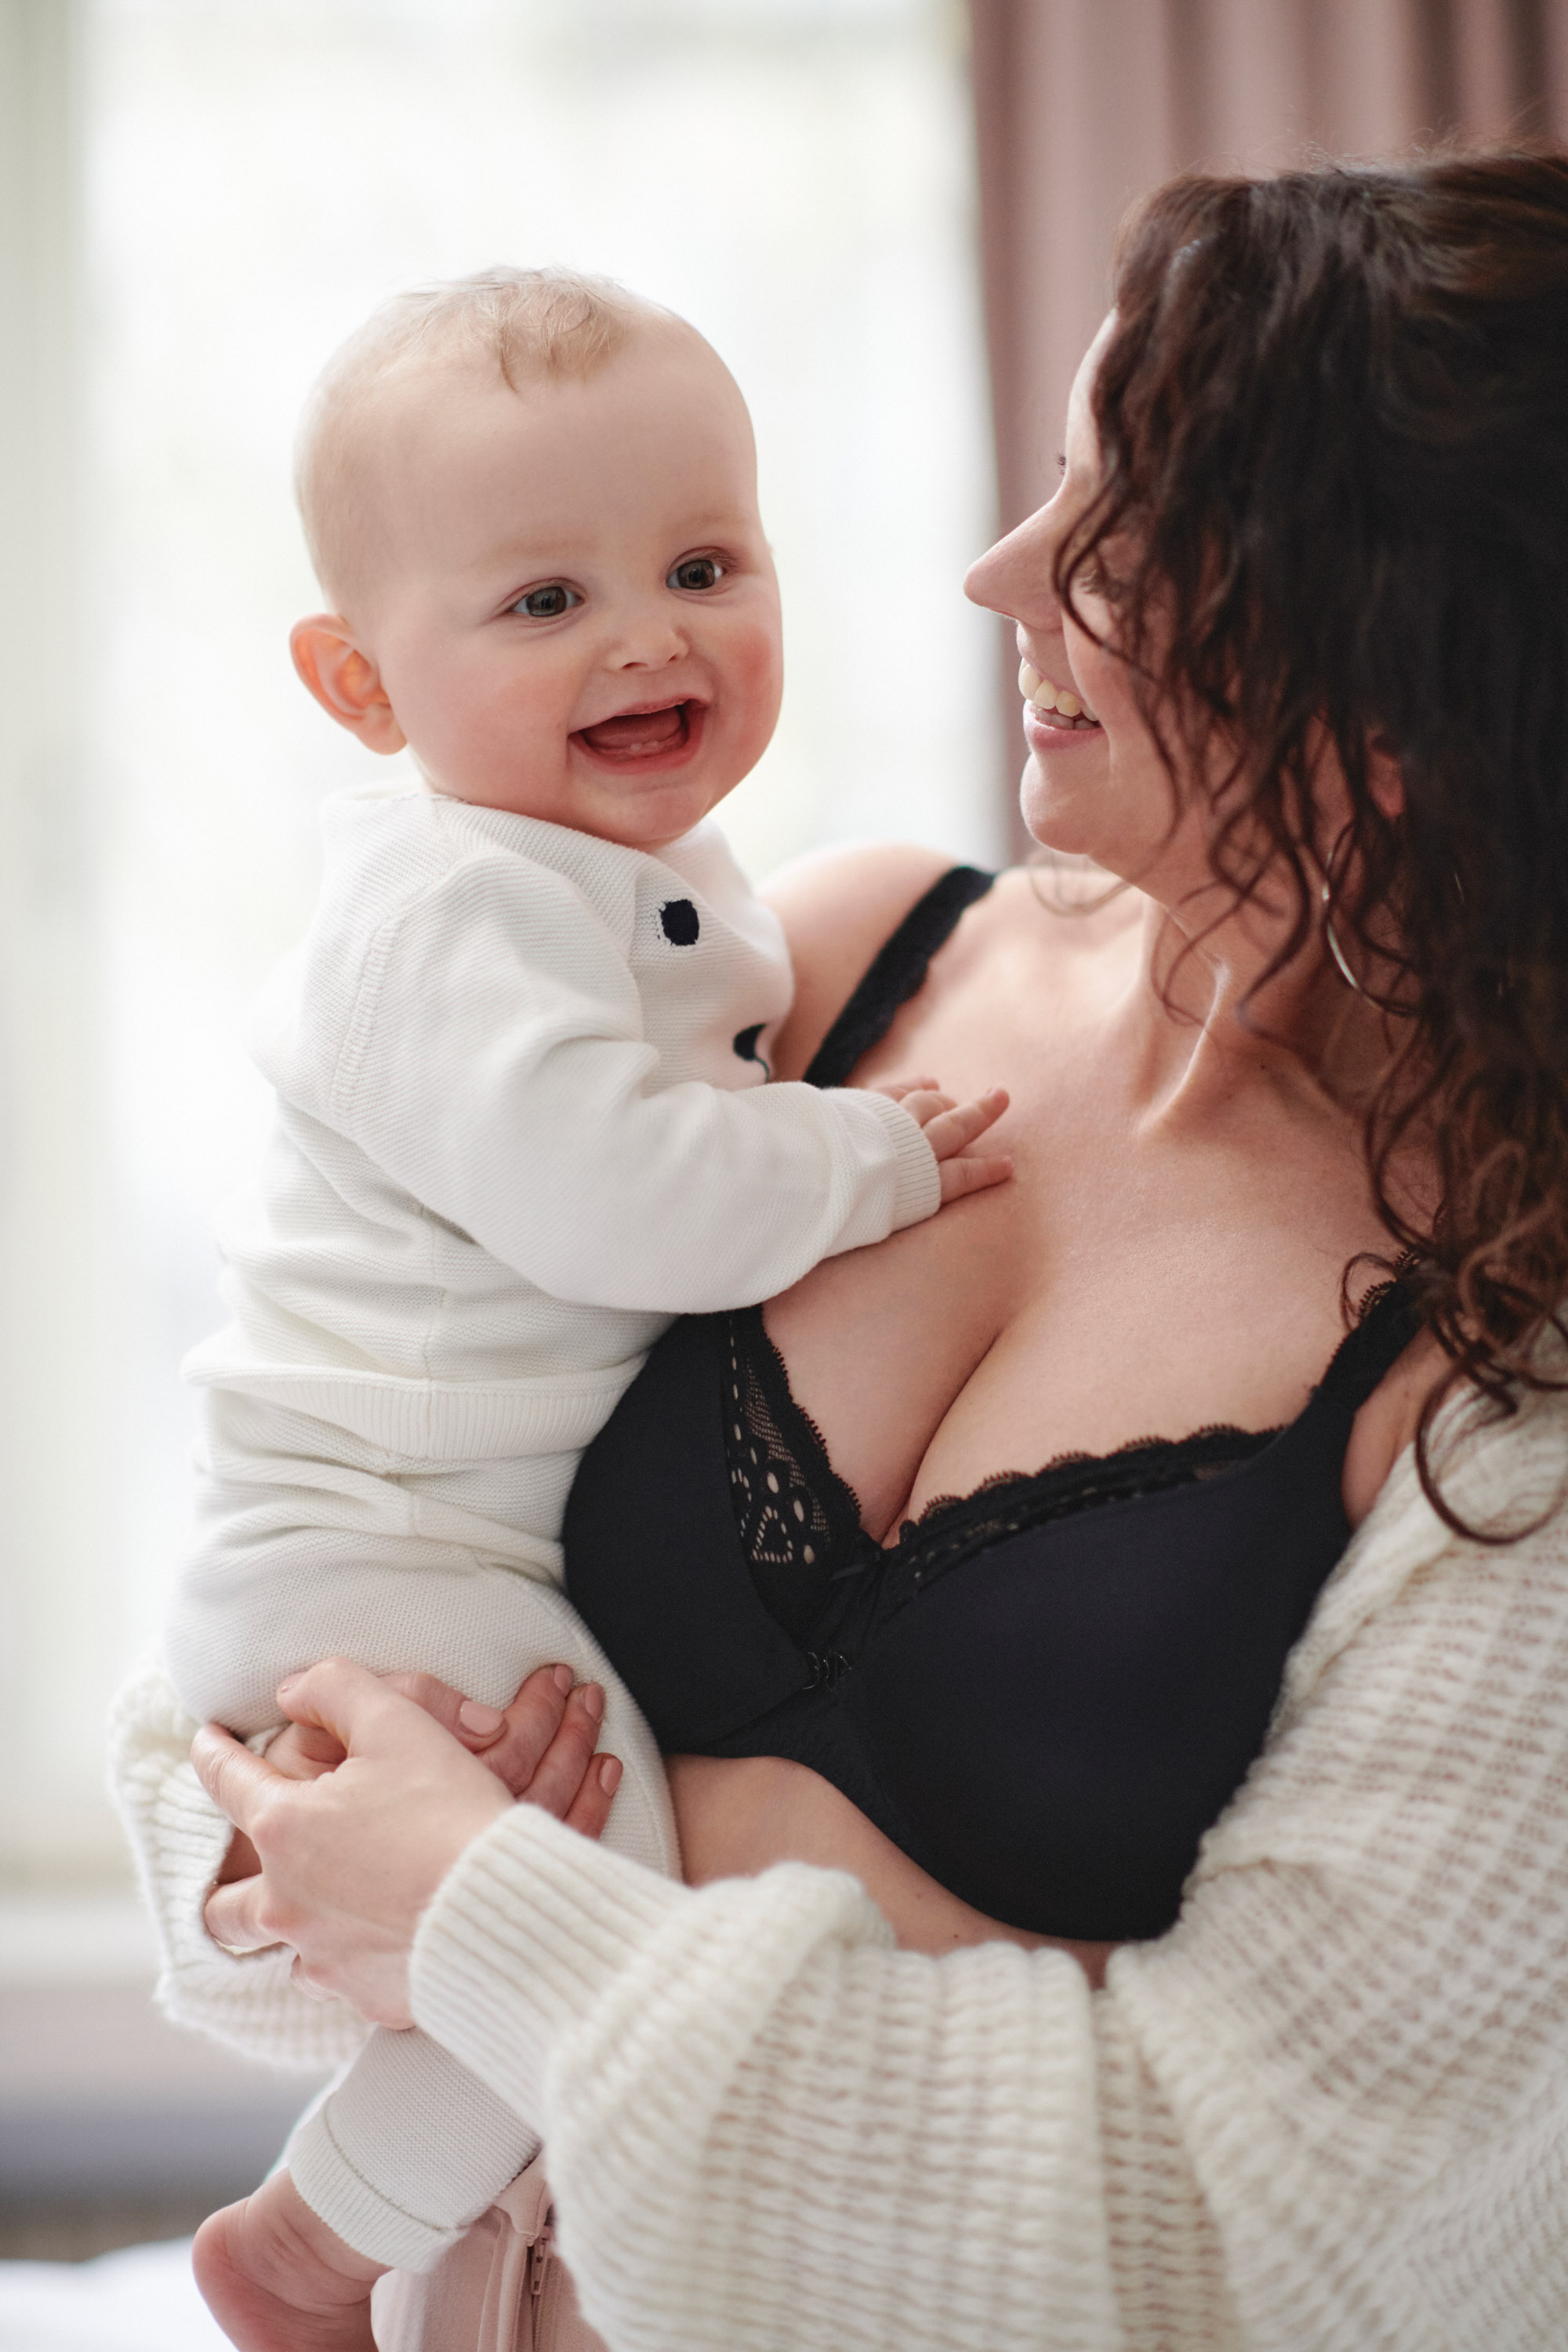 Tips for new mums: When to buy a nursing bra?